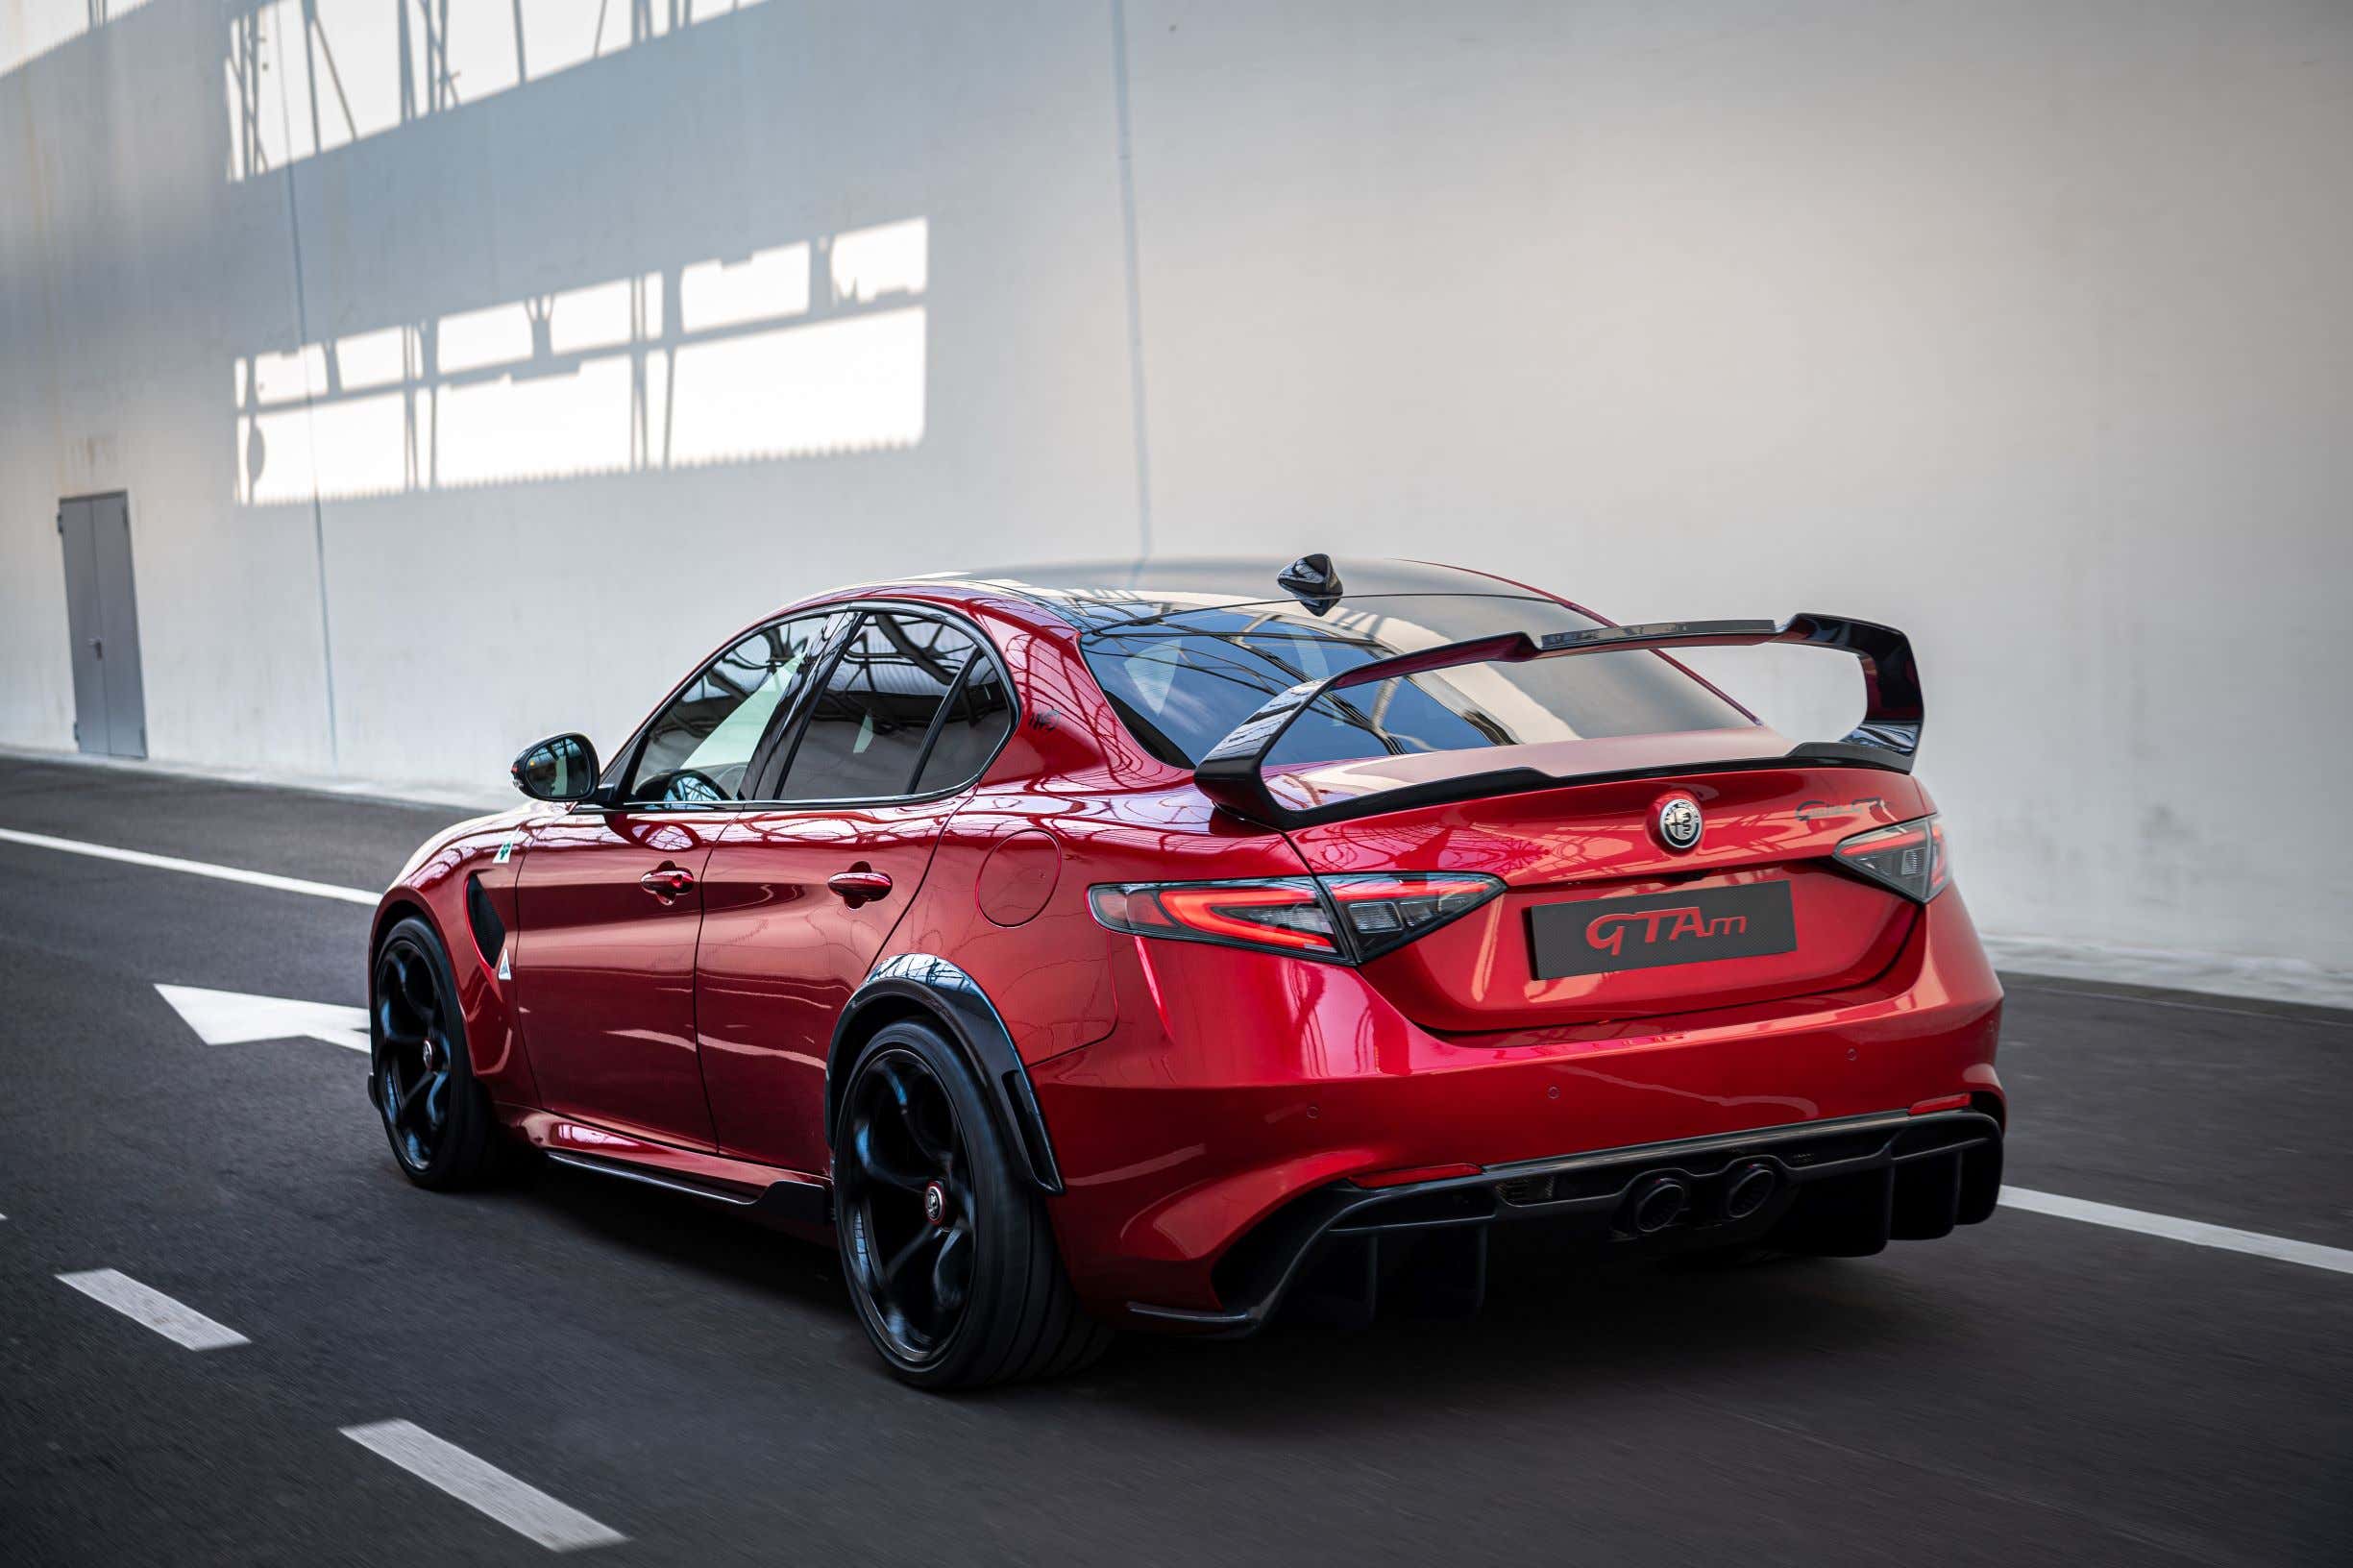 21 Alfa Romeo Gtam A 540 Hp Giulia With A Giant Wing And Back Seat Delete